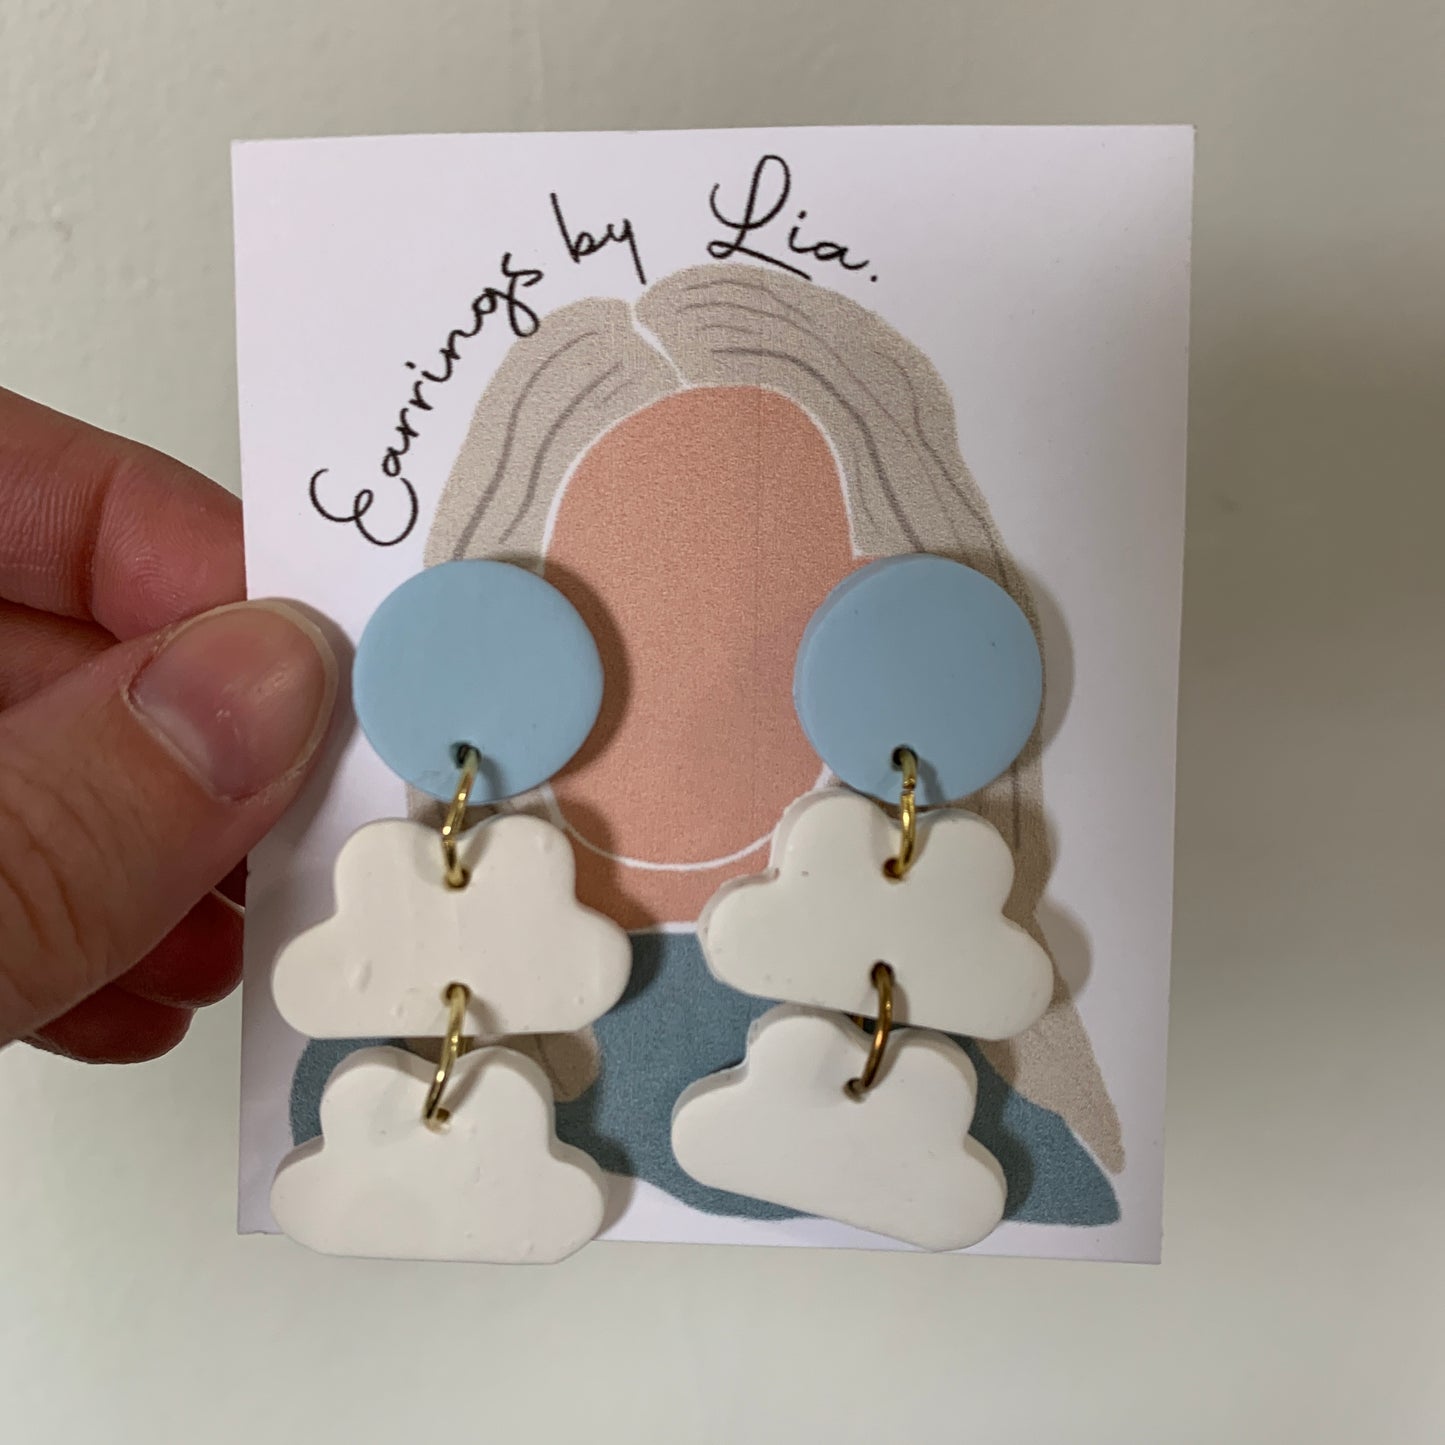 Variety of Clay Earrings by Lia